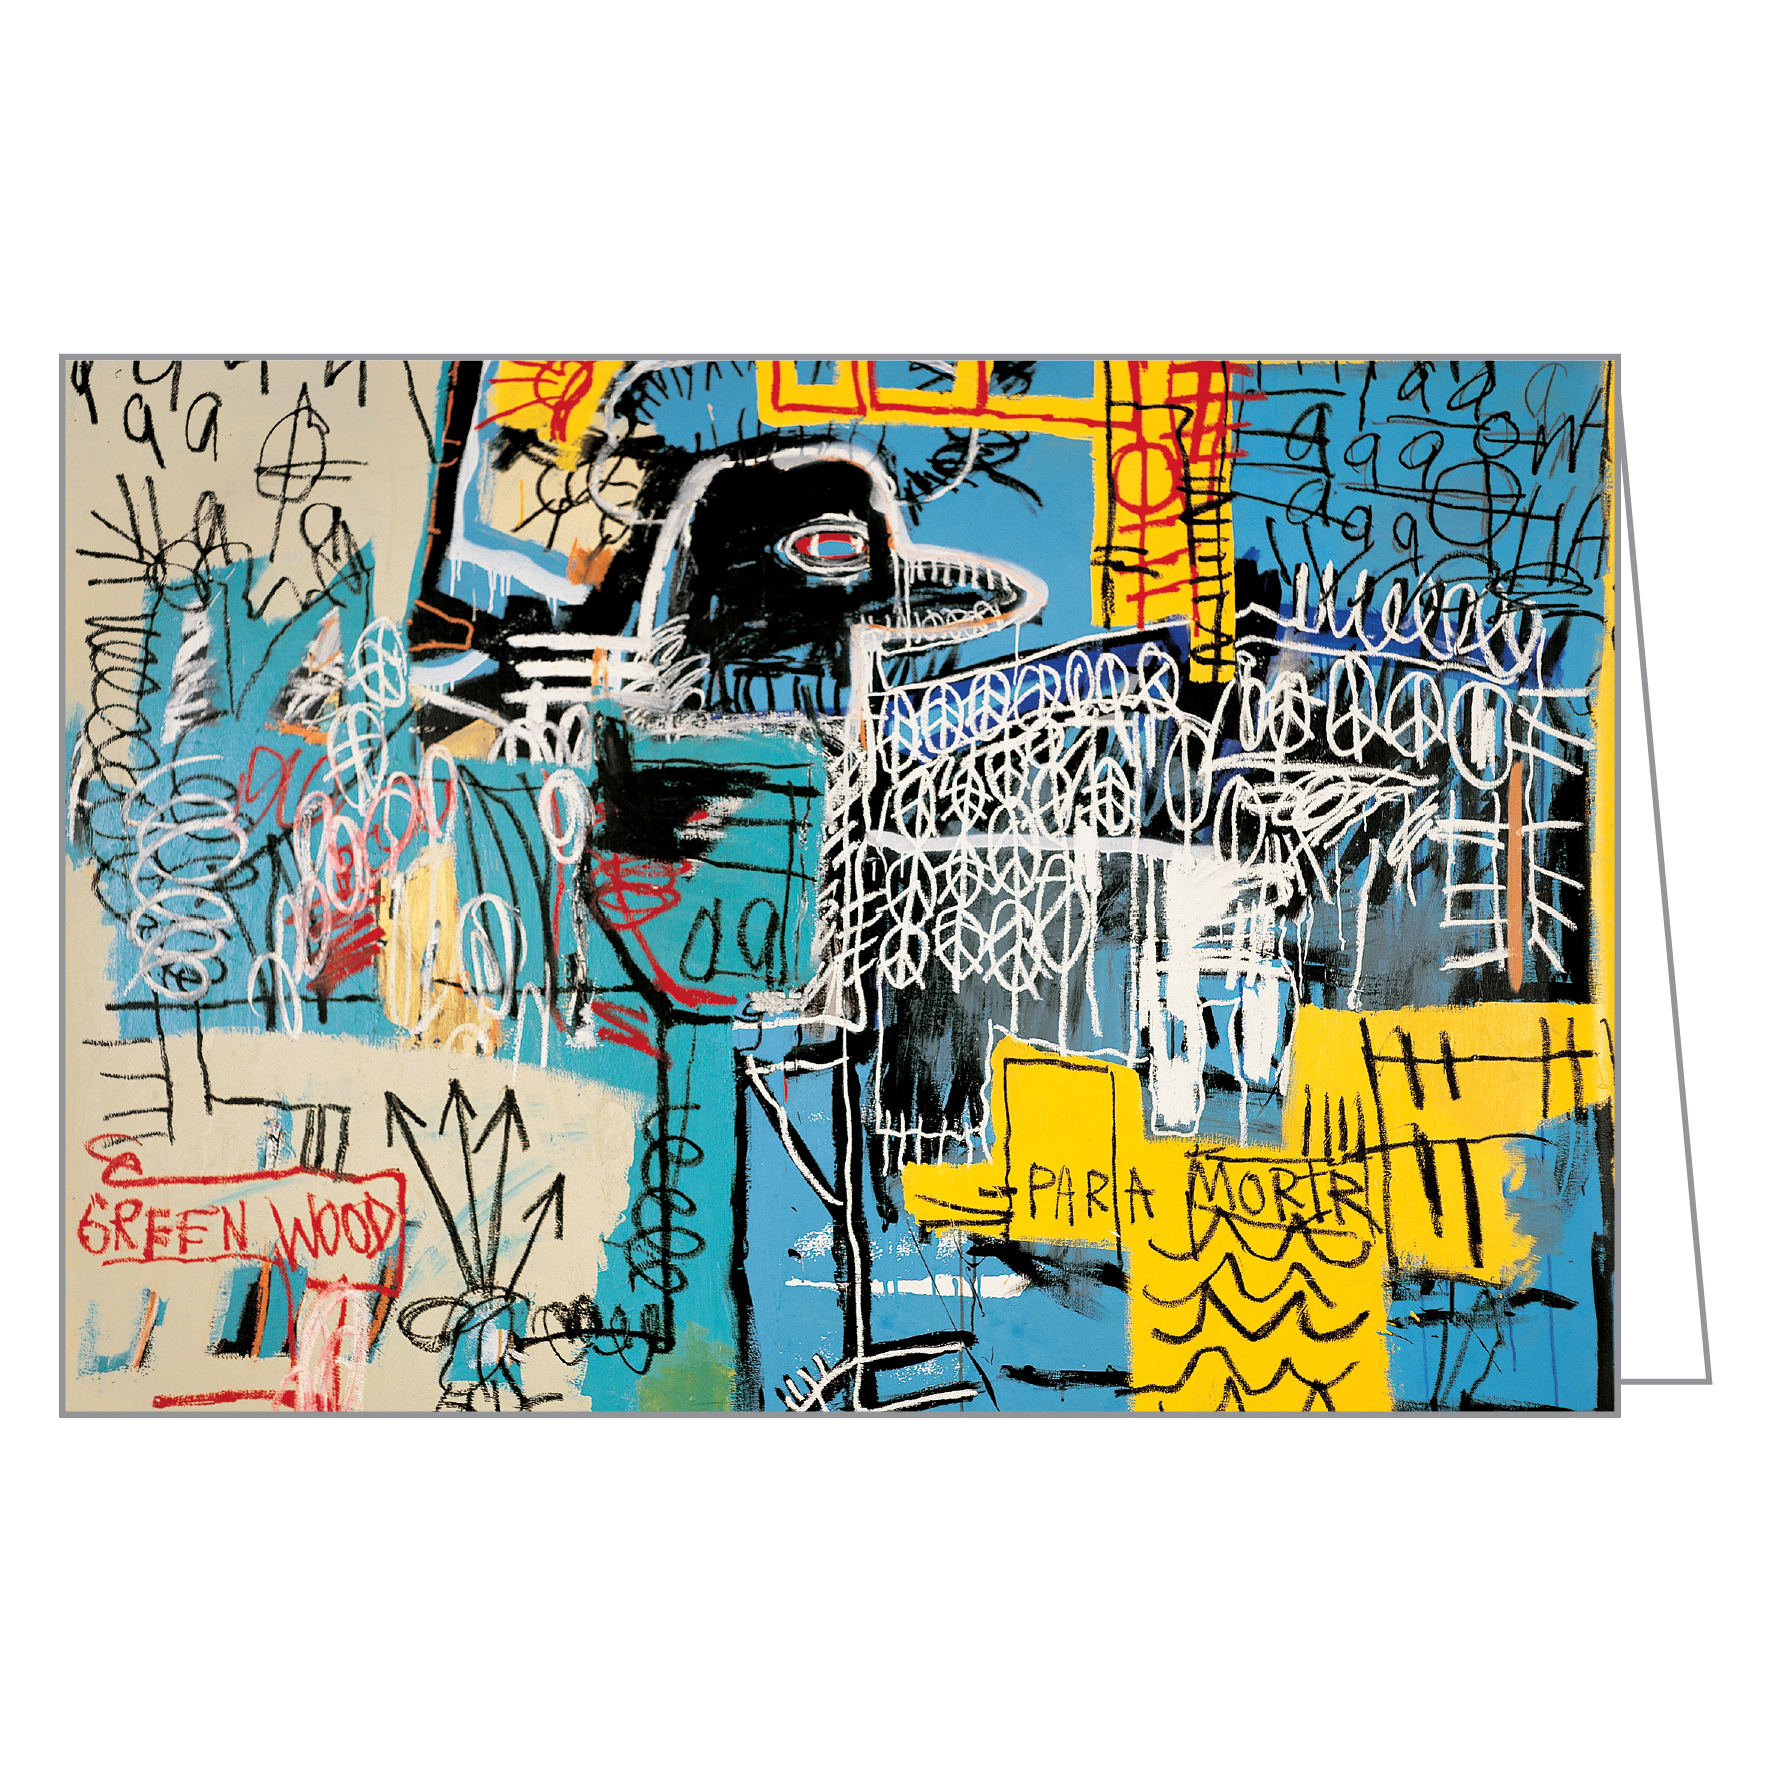 Graffiti style painting 'Bird on Money' by Jean-Michel Basquiat, to cover of notecard box, by teNeues stationery.